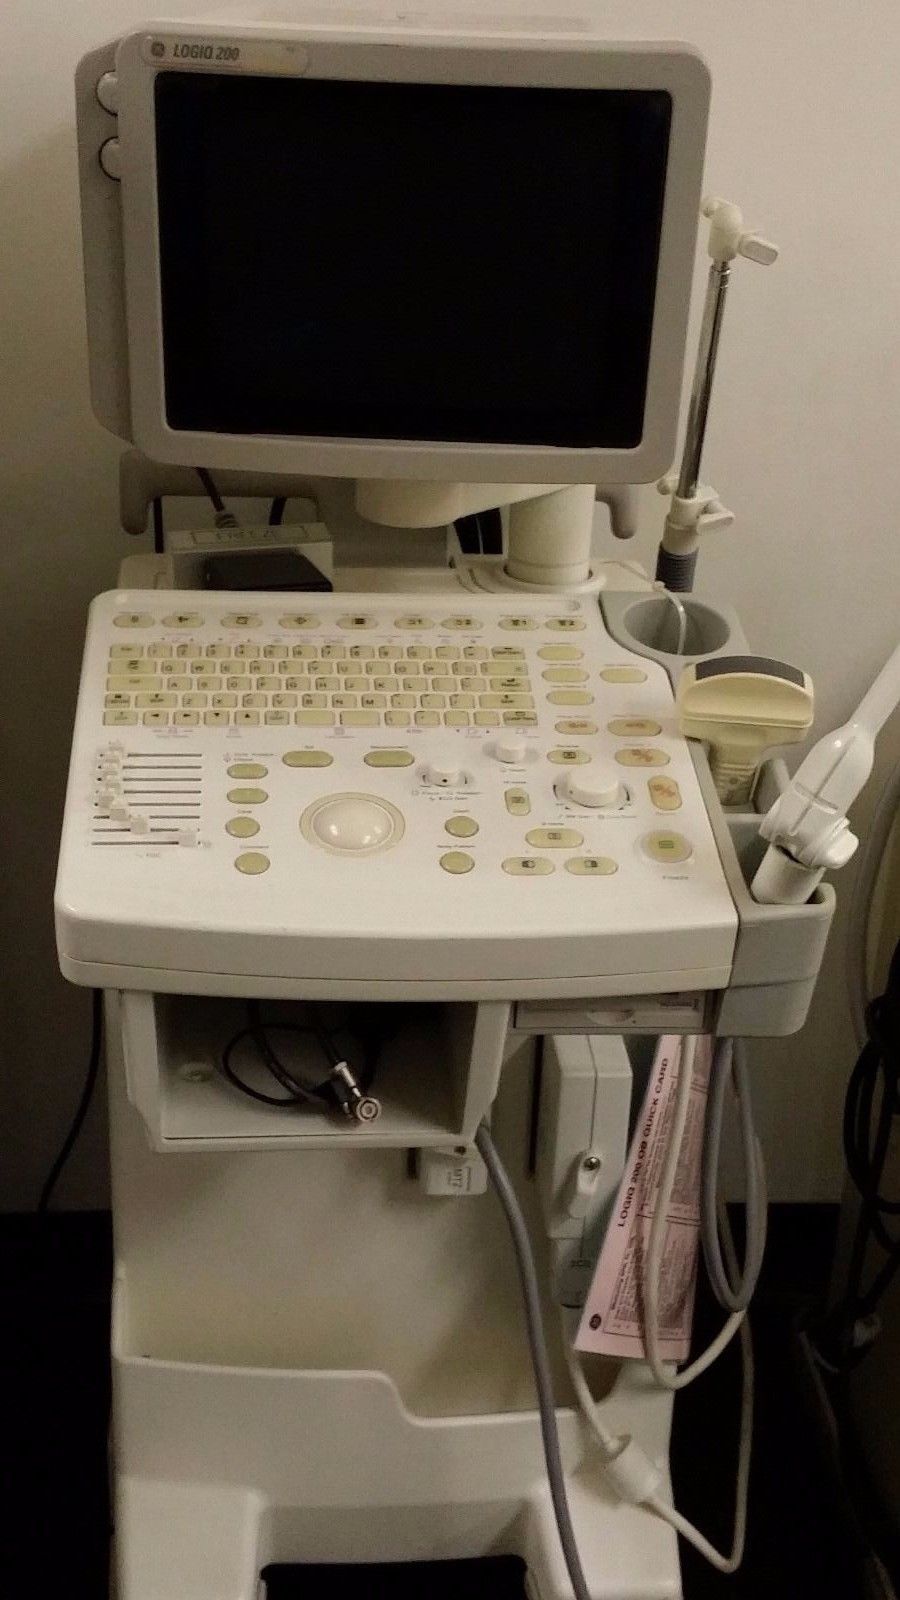 GE Logiq 200 Pro Ultrasound with 2 Transducer Probe Imaging Urology DIAGNOSTIC ULTRASOUND MACHINES FOR SALE